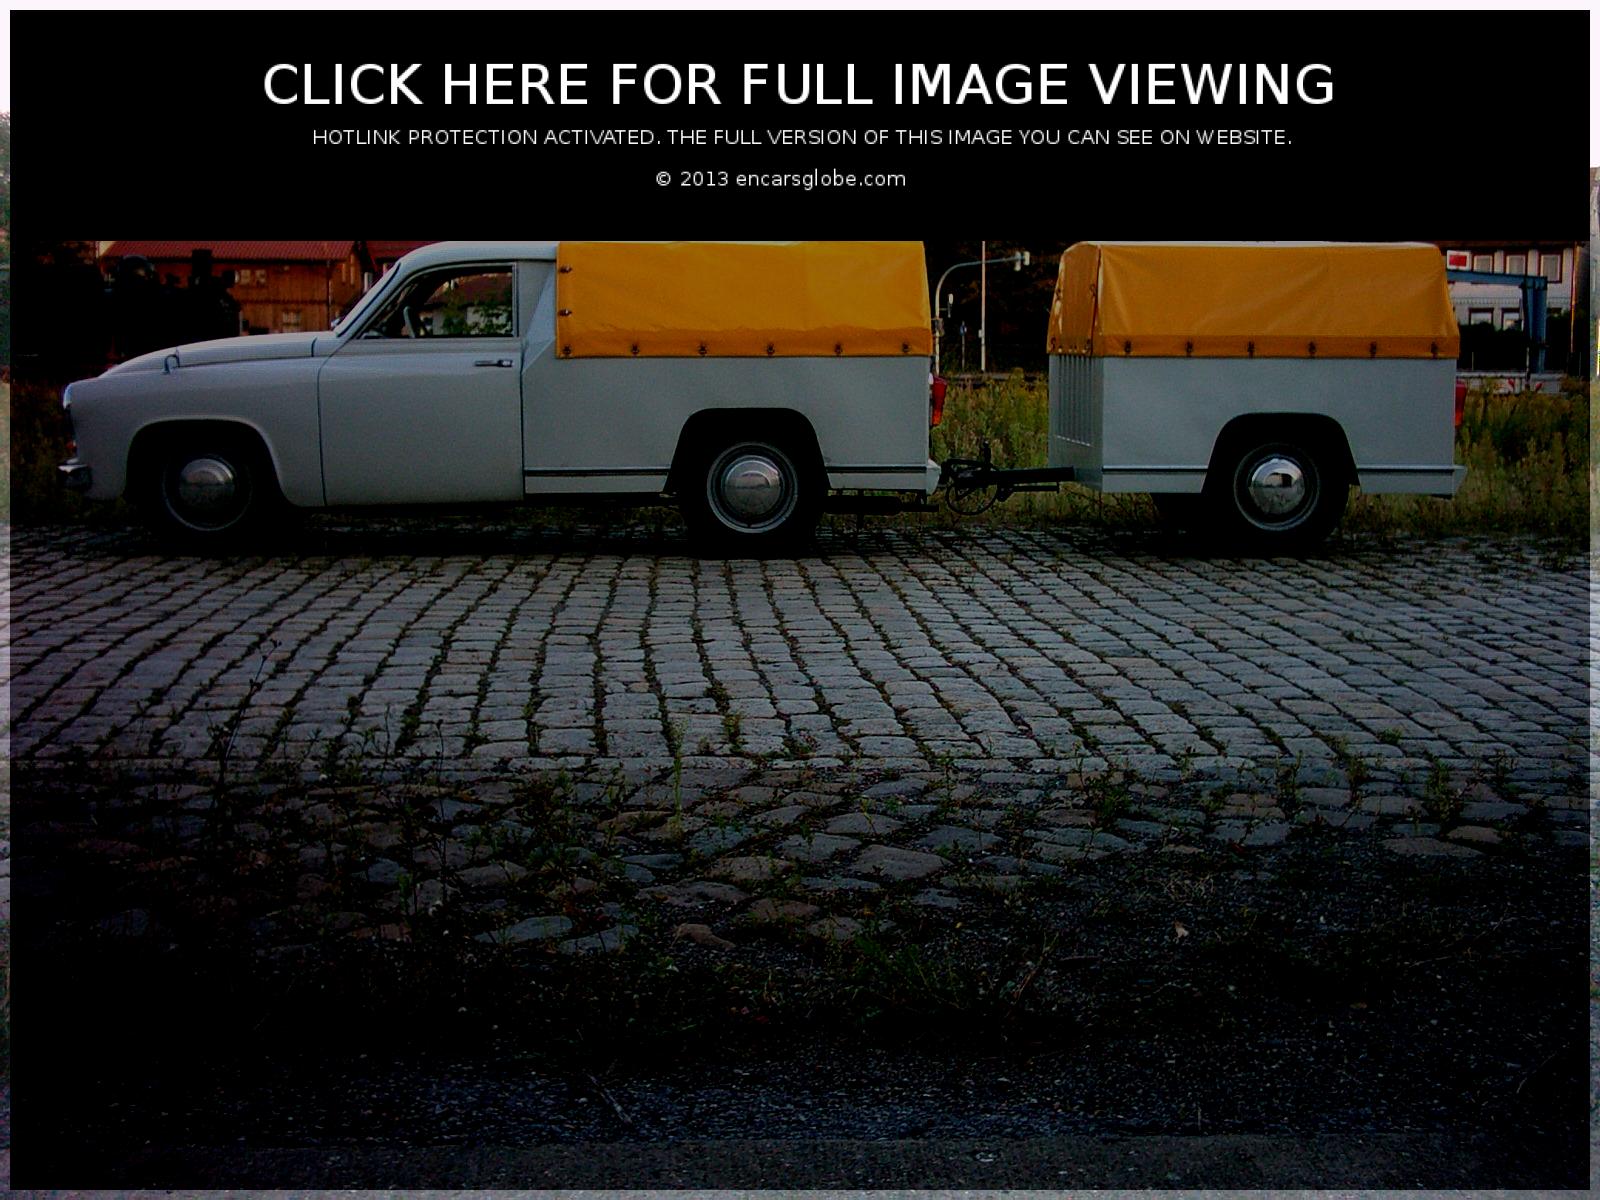 Wartburg 1000-Coup 311 Photo Gallery: Photo #09 out of 11, Image ...